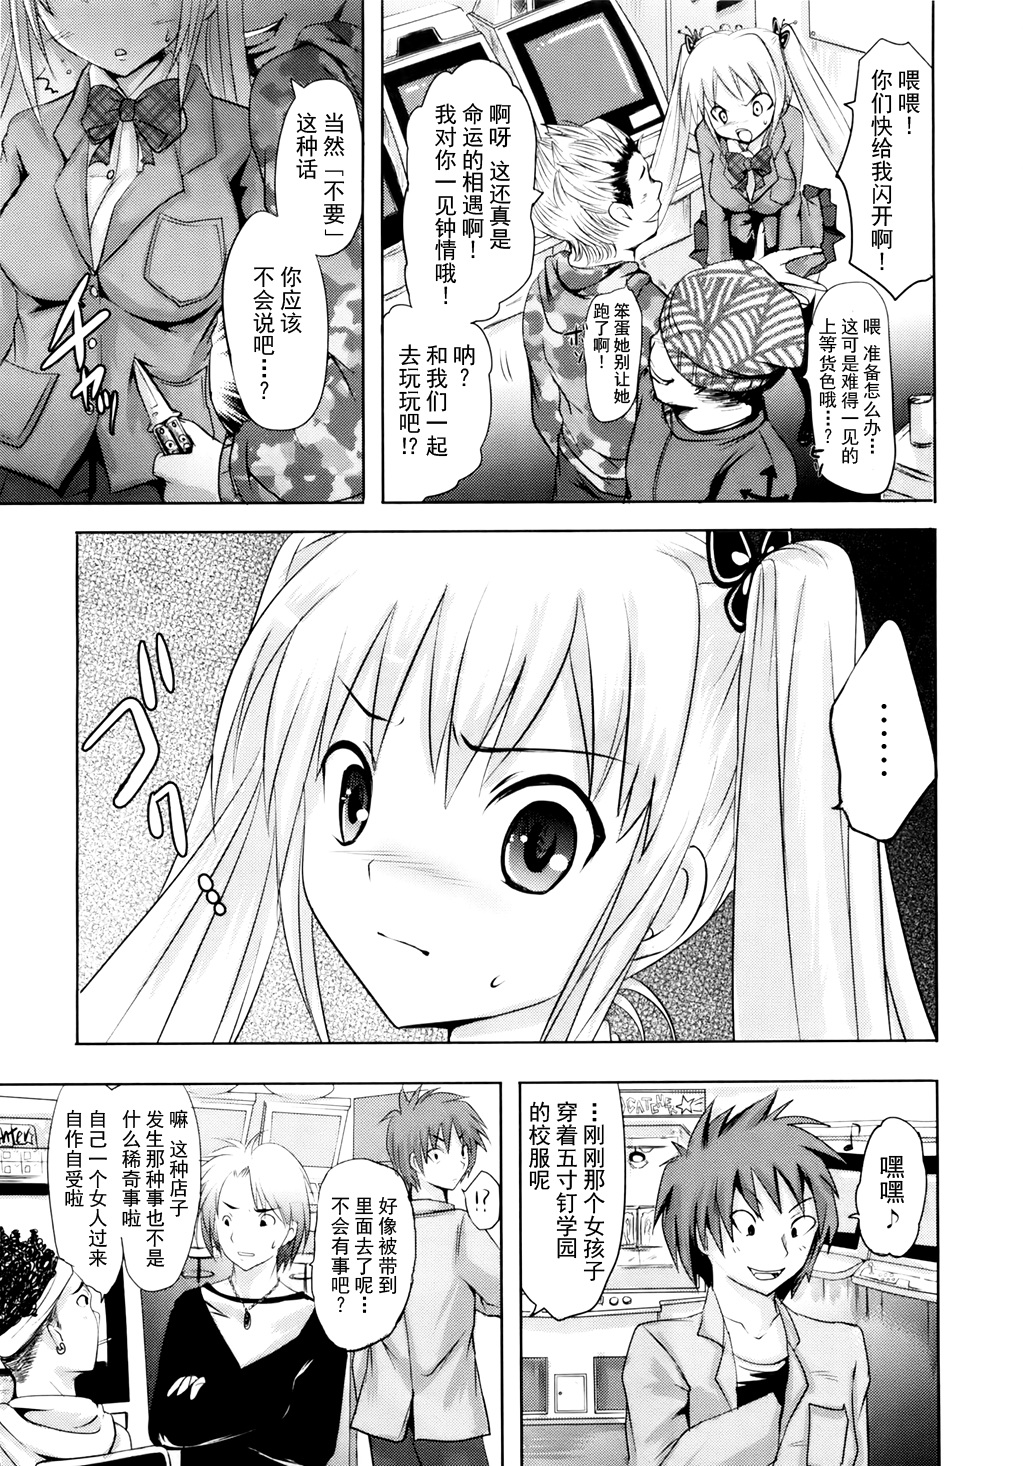 [Natsume Fumika] Sundere! Ch.6 [Chinese] [夏目文花] スンデレ! CH6[中文翻譯]